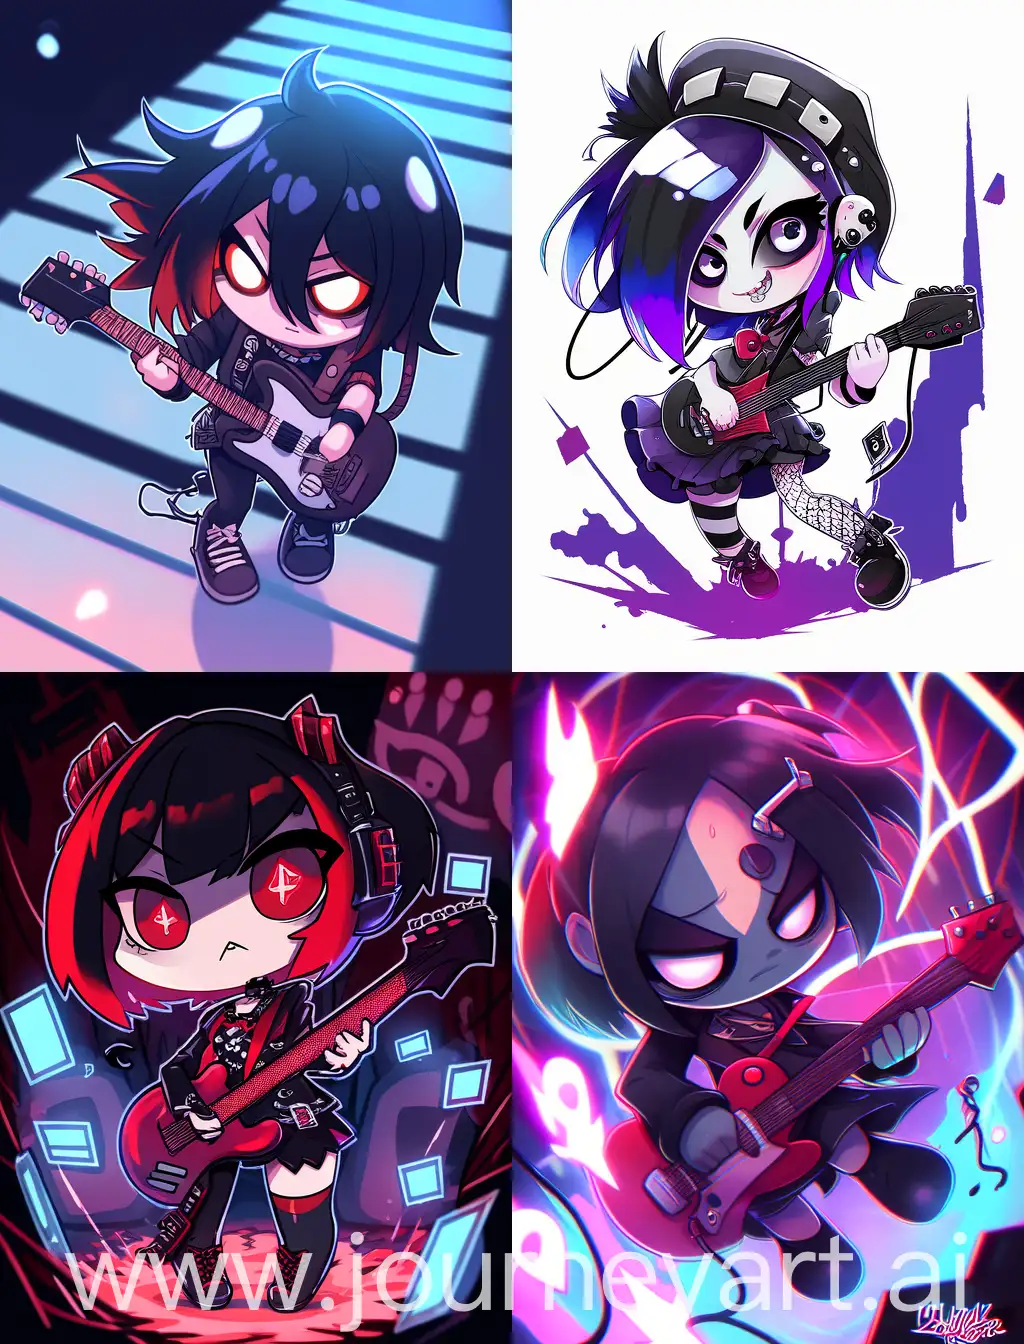 Chibi-Emo-Girl-Playing-Guitar-in-Cartoon-Anime-Style-with-Spooky-Background